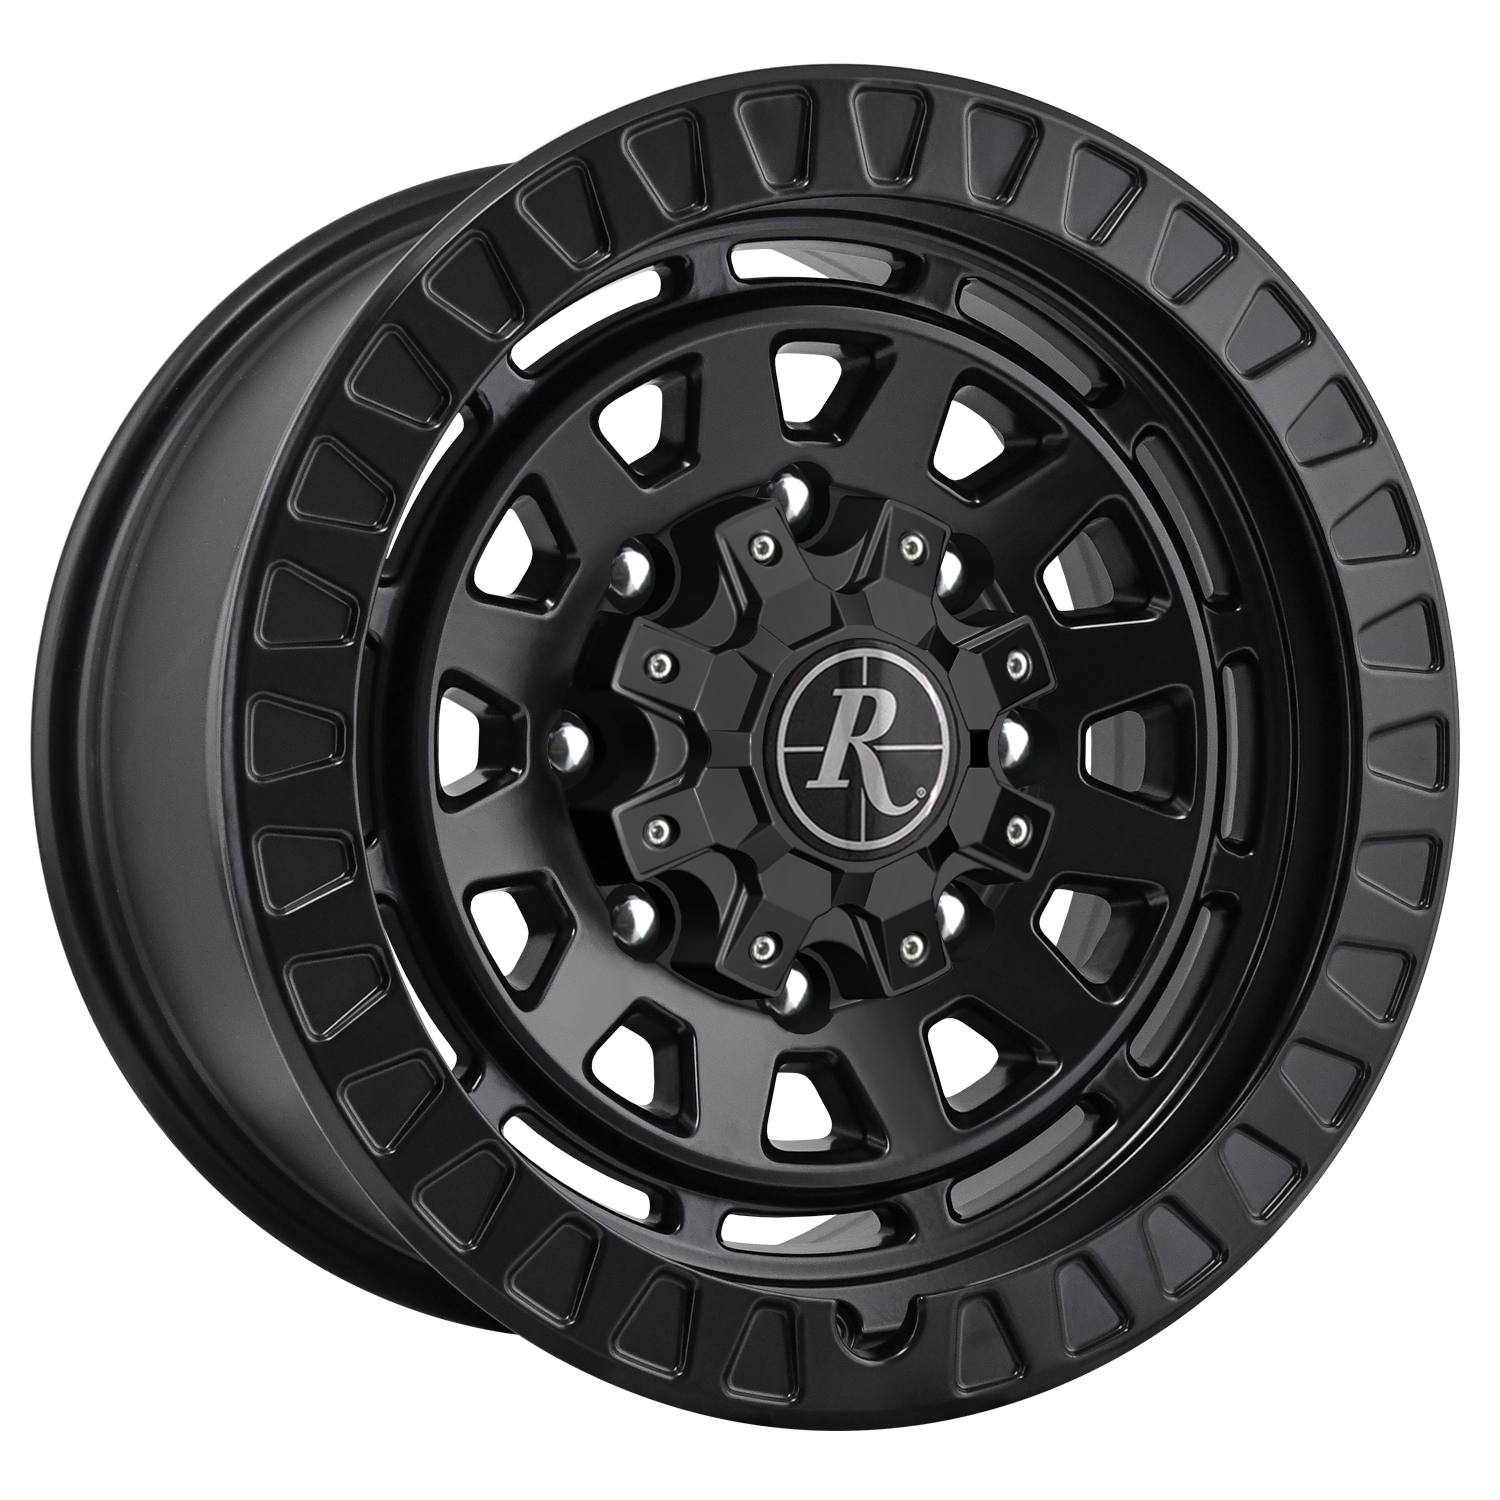 Remington® Off-Road - Venture - Offroad Truck & SUV - Part Number: VE1790850ASB Wheel